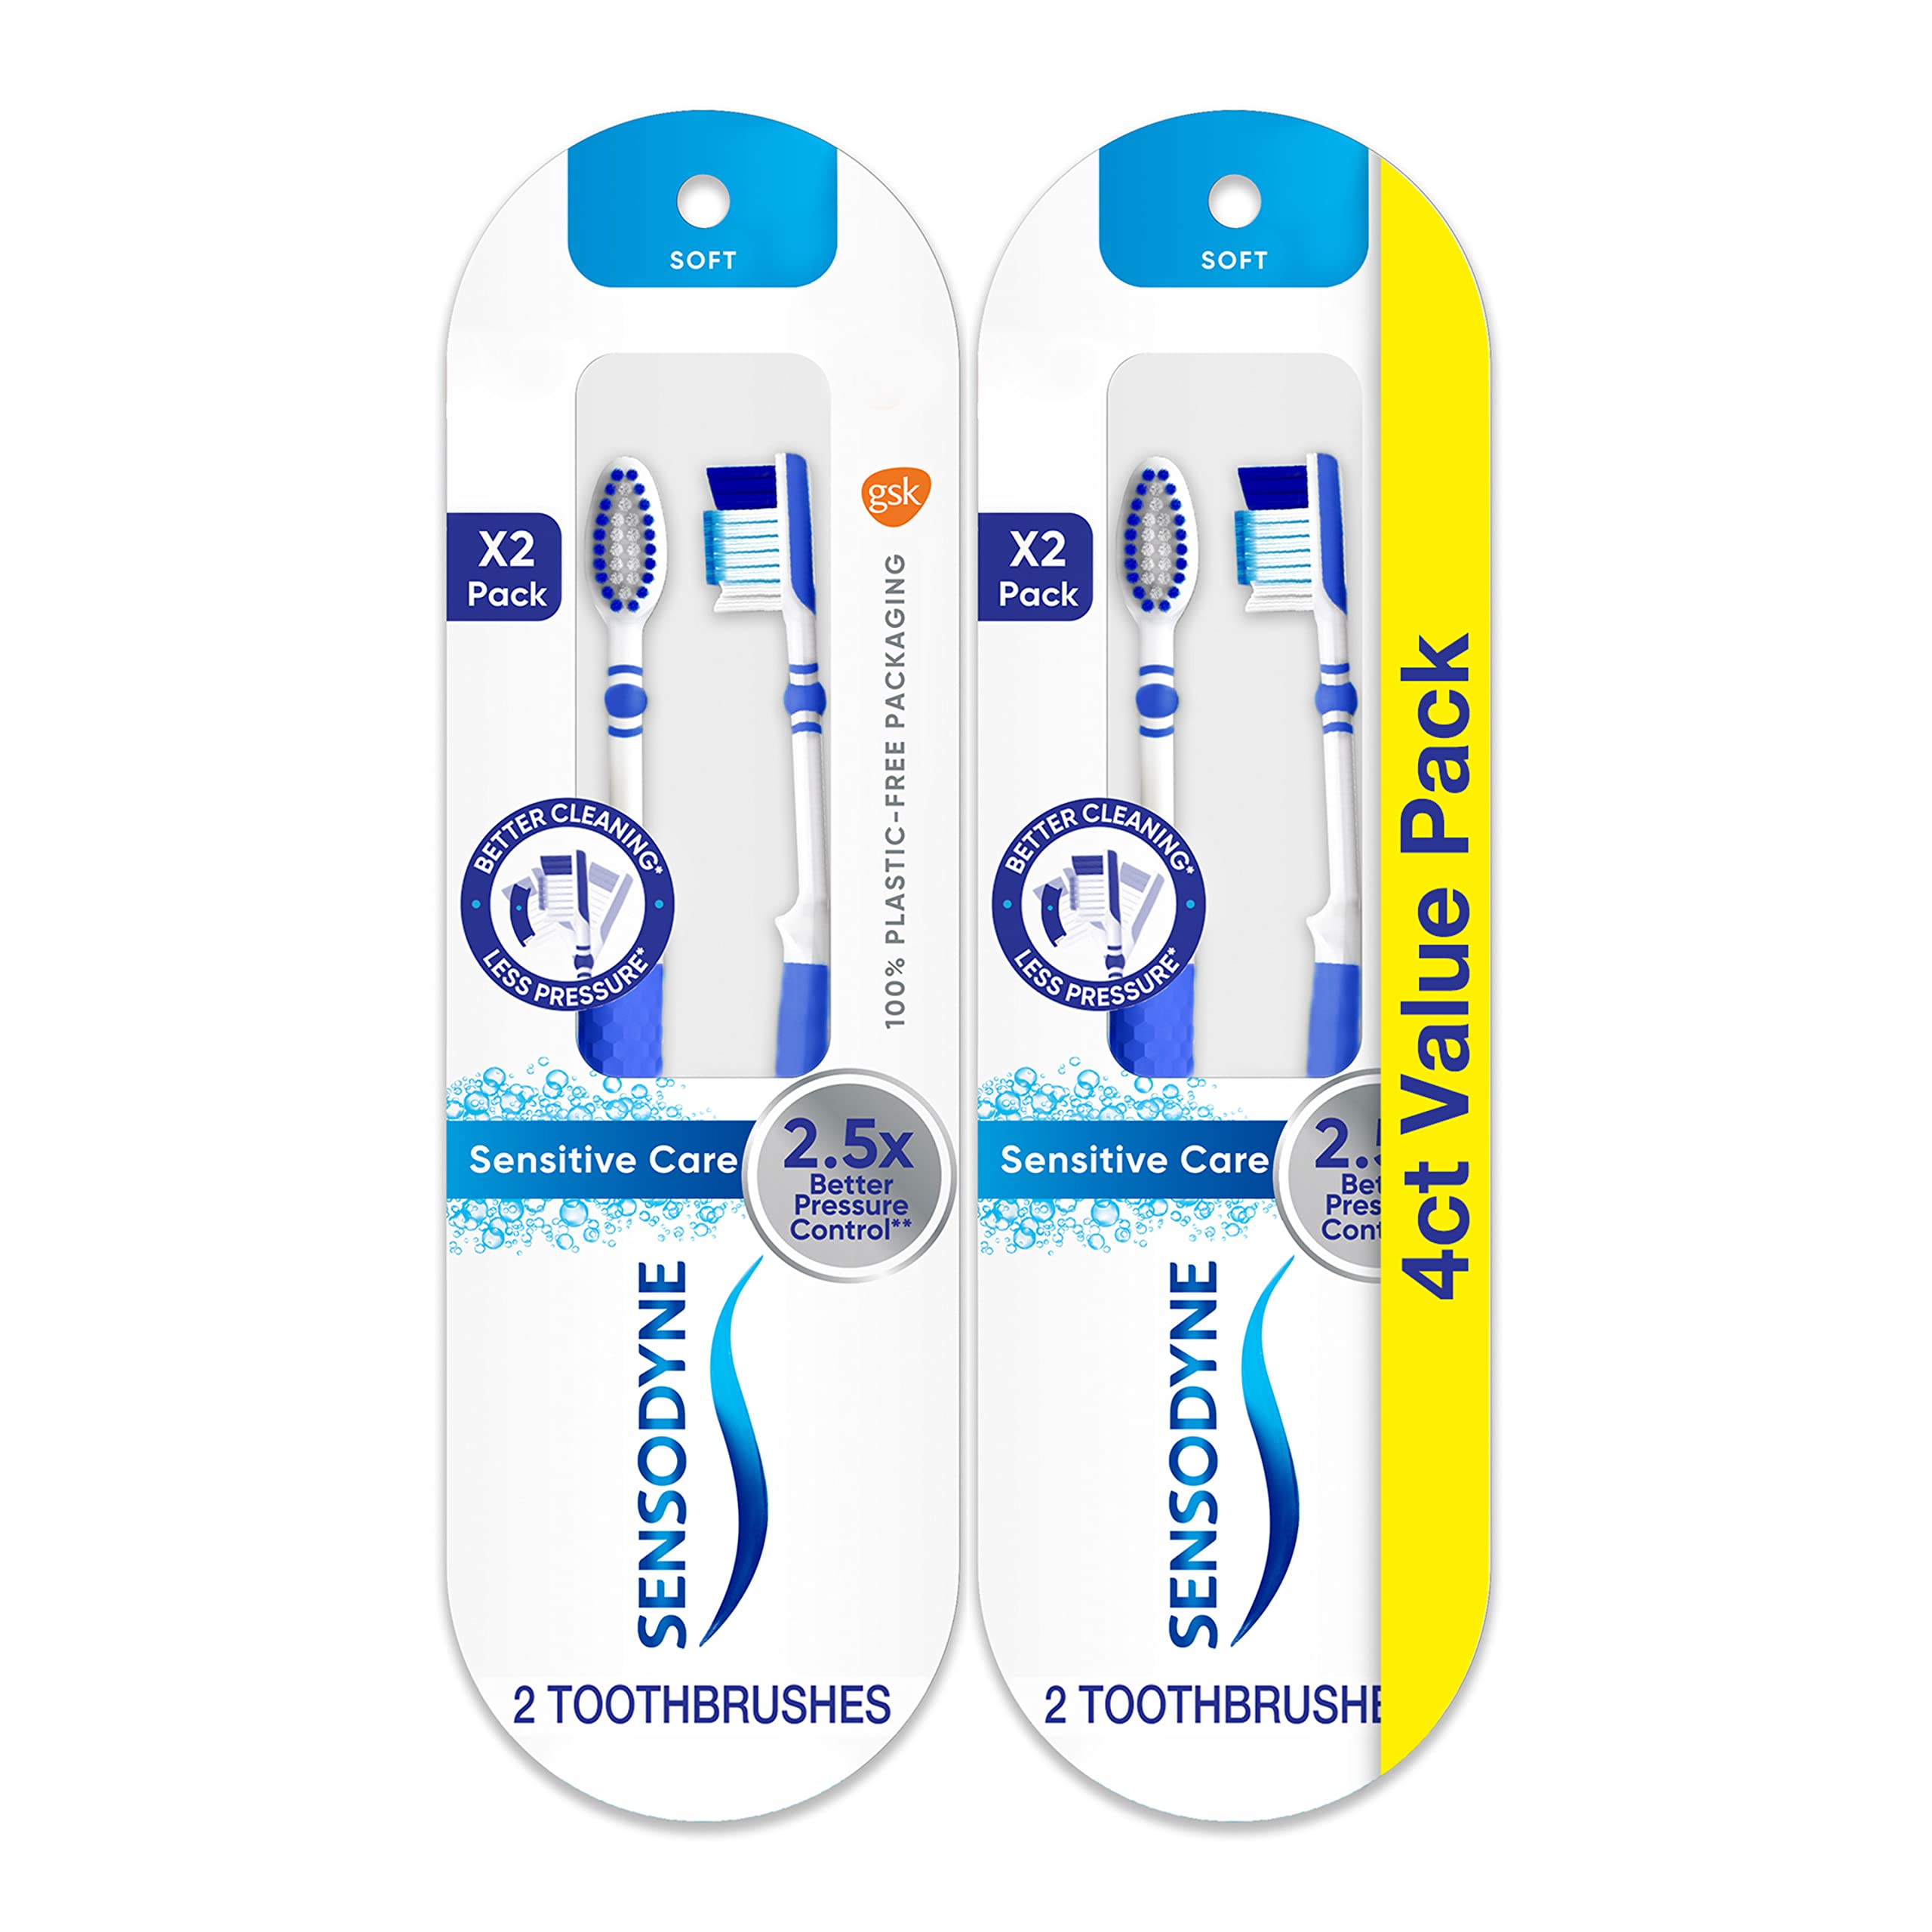 4-Count Sensodyne Adults Sensitive Care Toothbrush (Soft) $3.49 ($0.87 each) w/ S&S + Free Shipping w/ Prime or on $35+